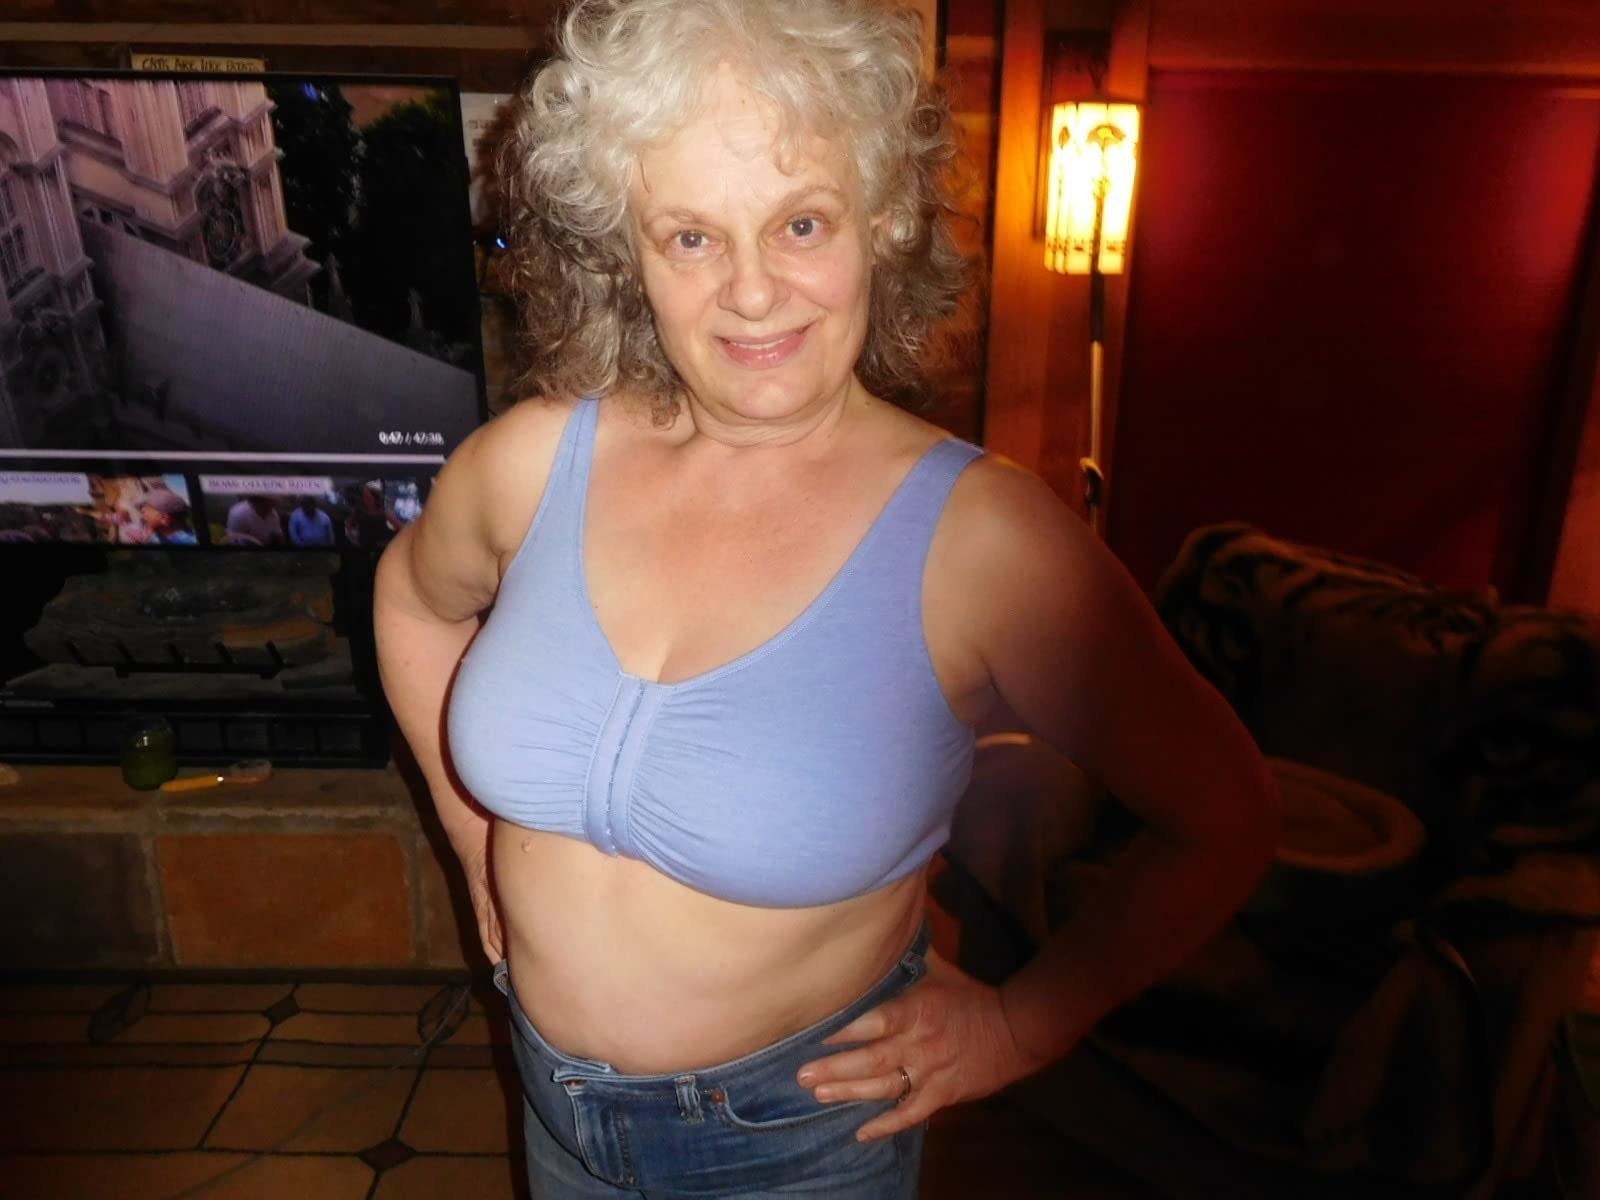 Reviewer posing with hand on hip in purple front-closure bra